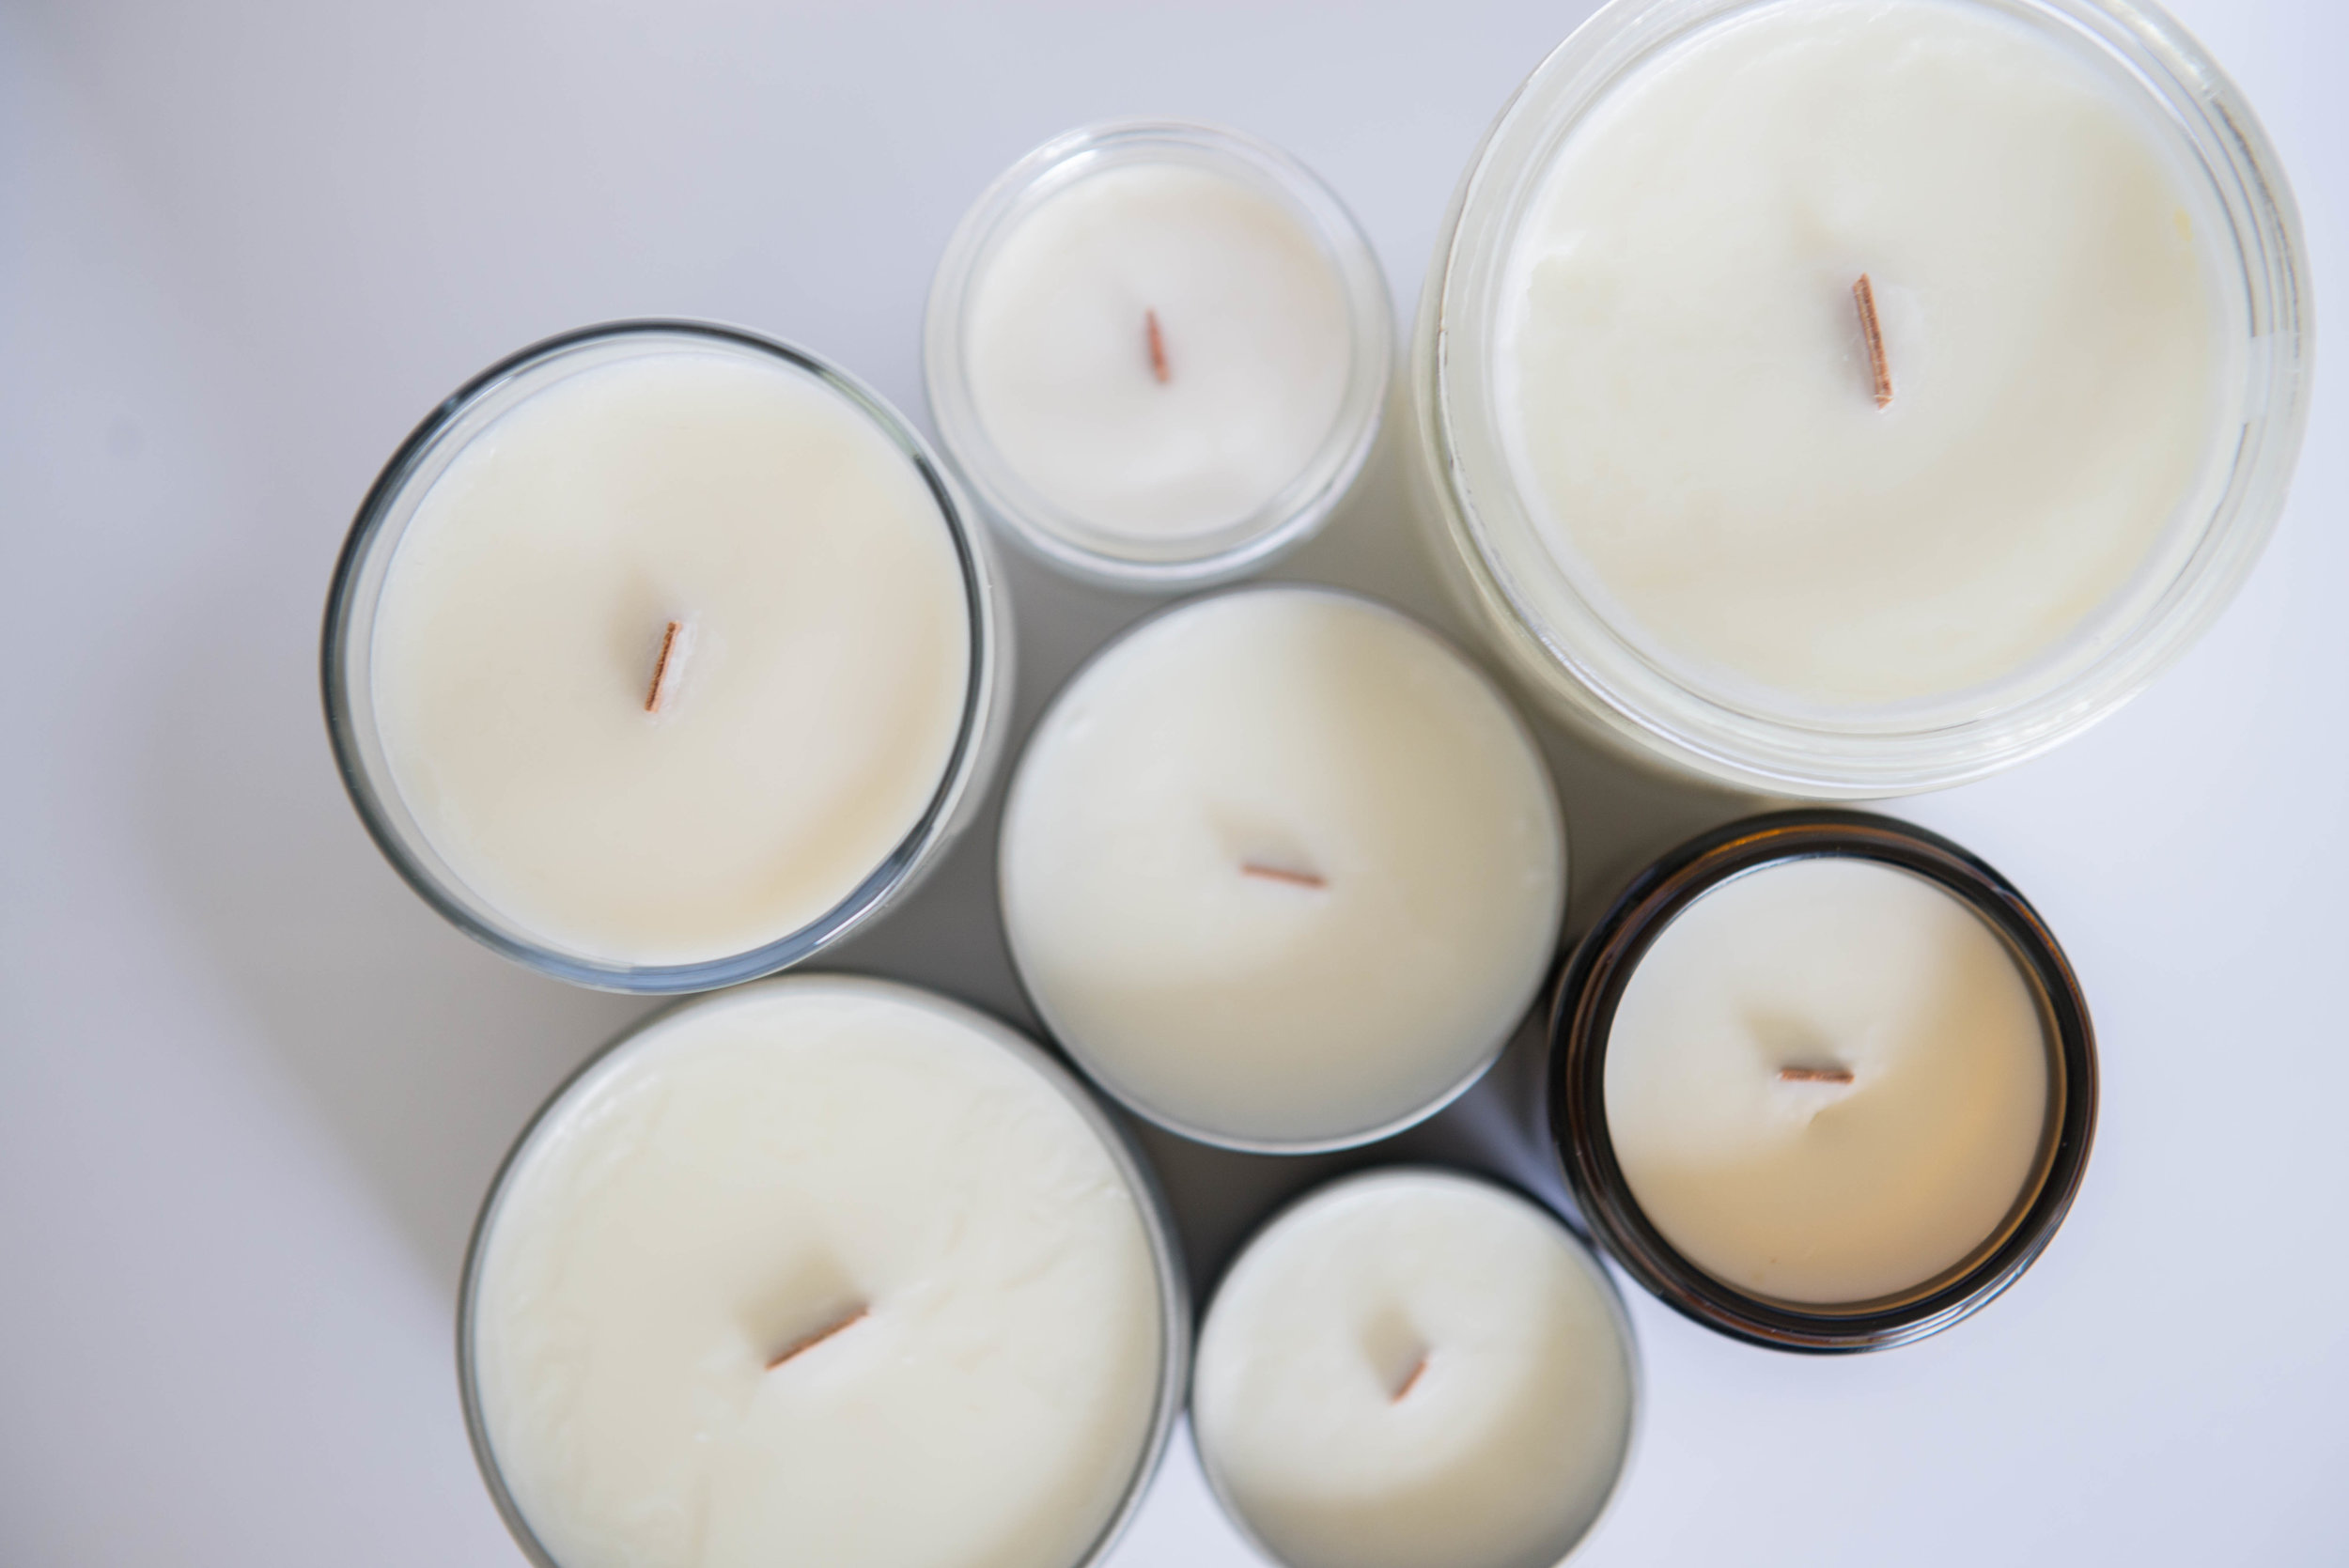 865 Candle Company Aerial Soy Candles